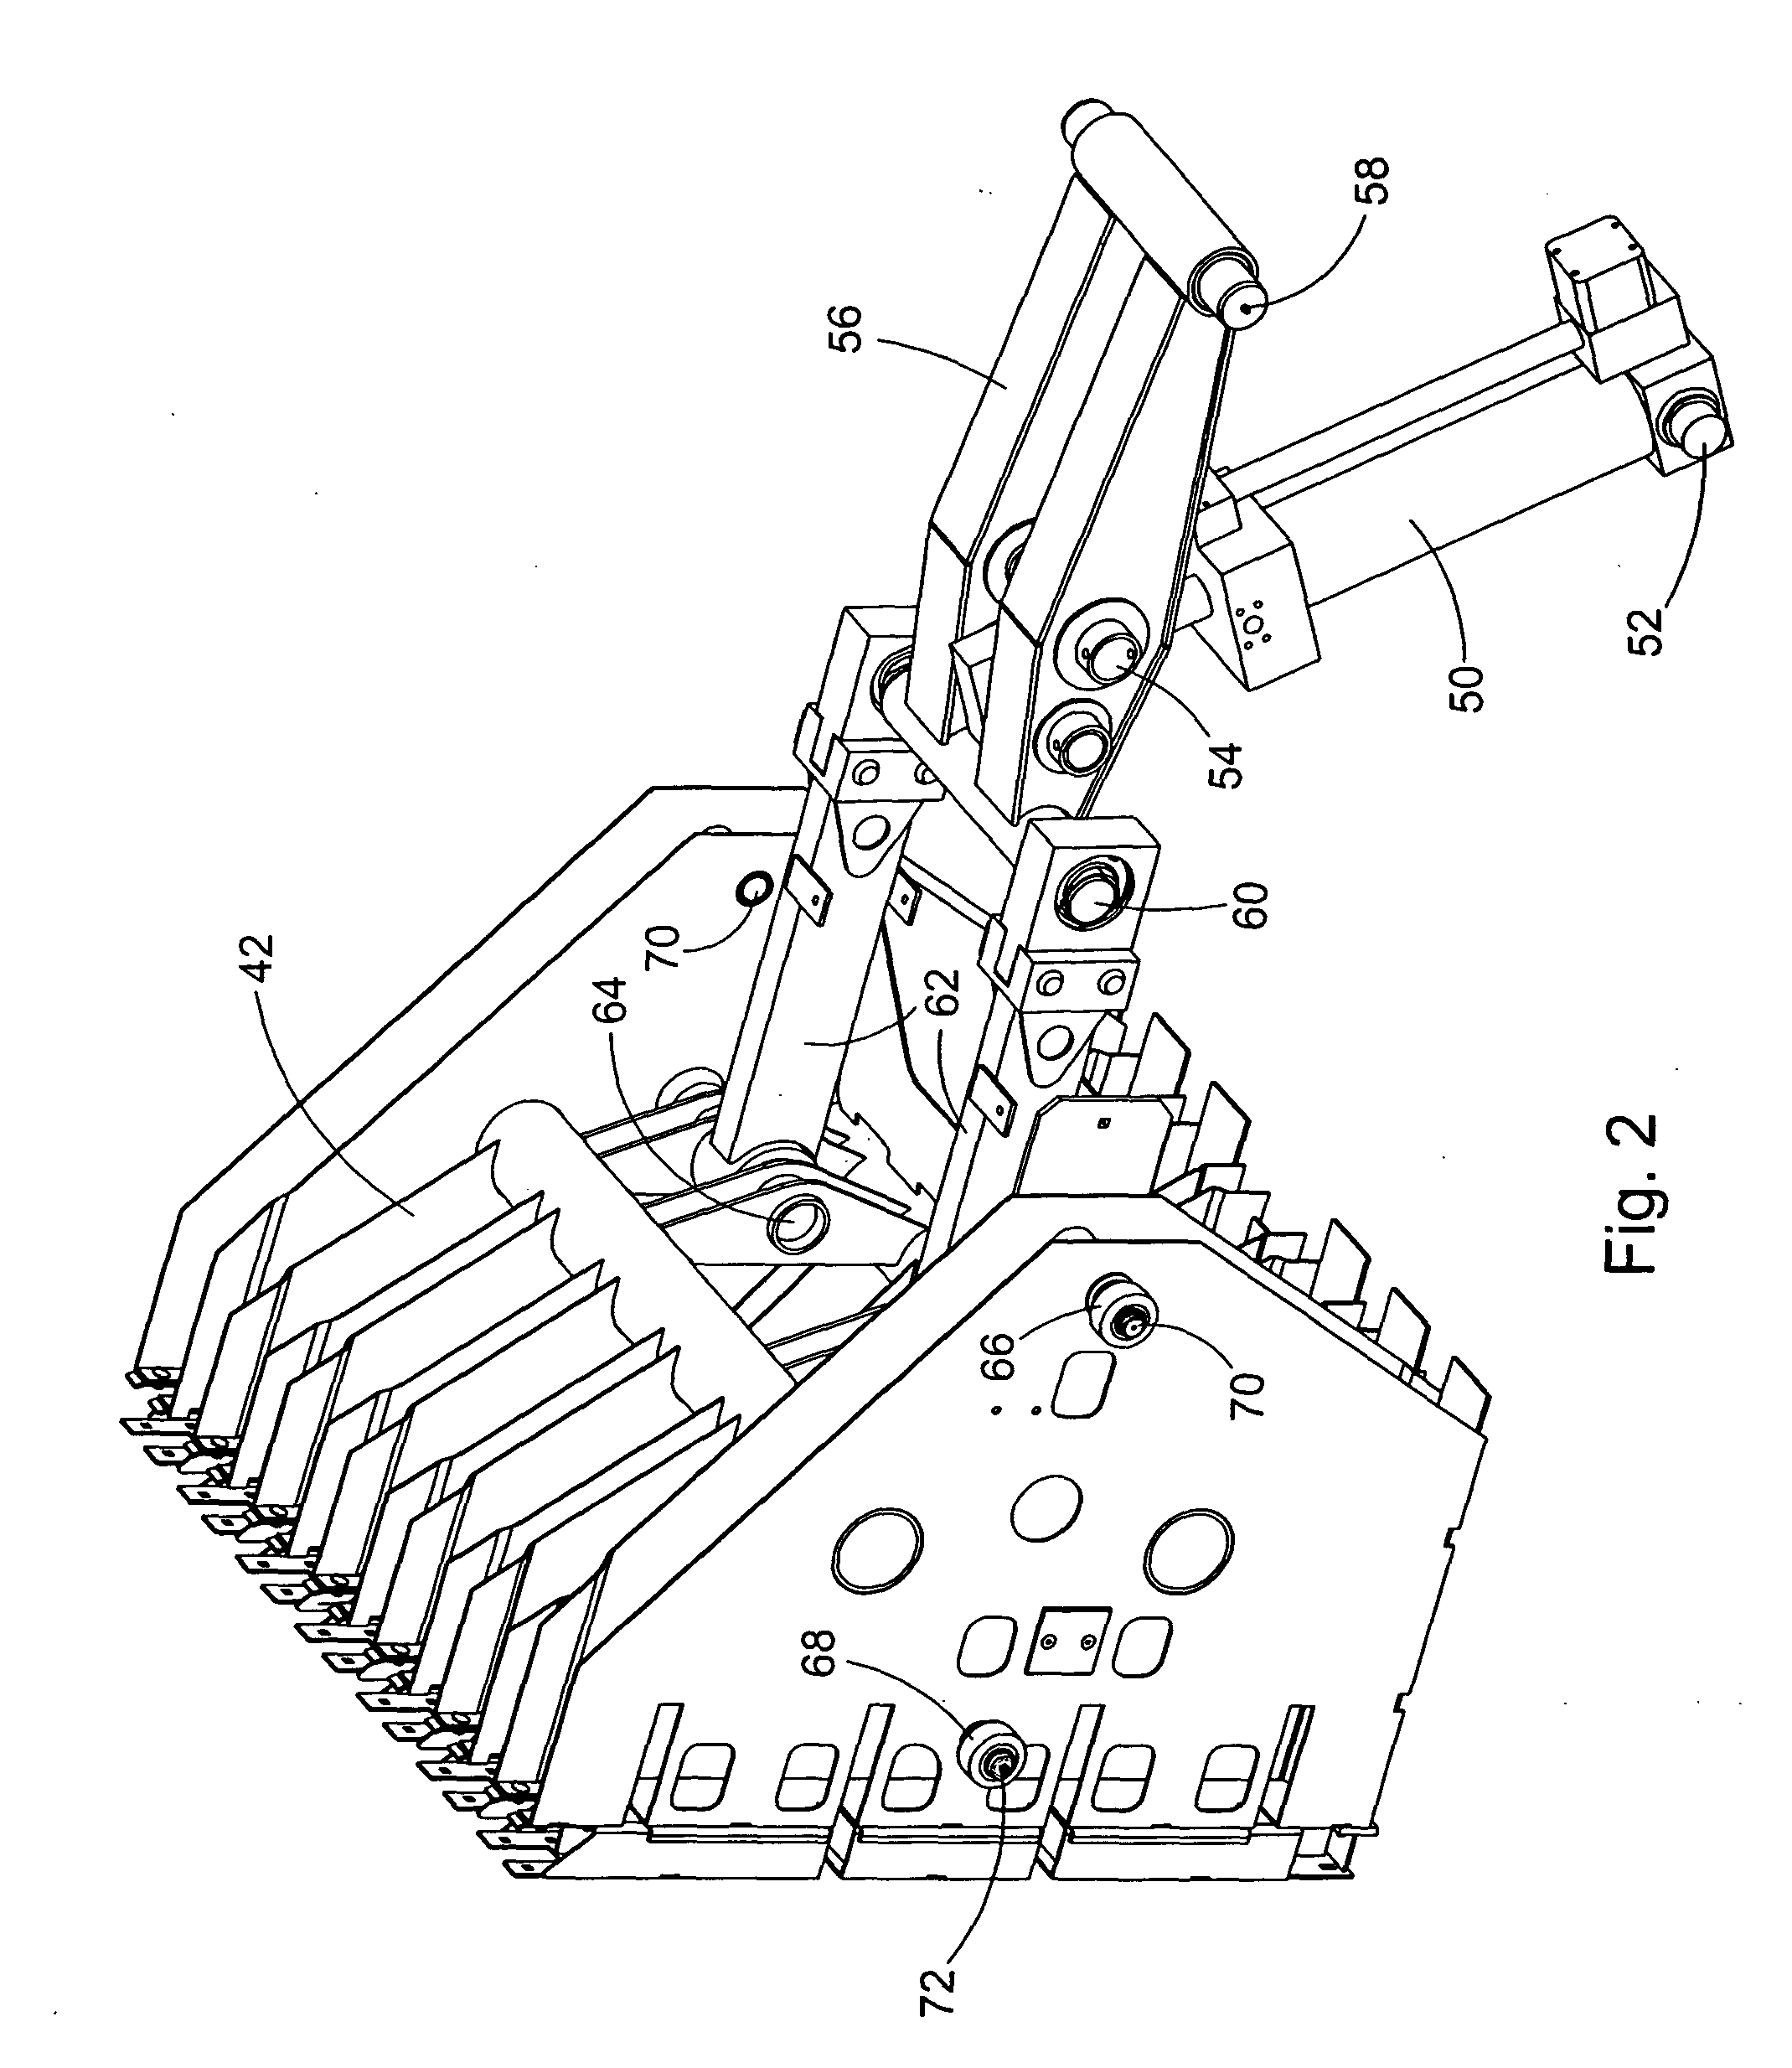 Baler plunger drive load measurement pin offset from either connecting rod center line or horizontal mid-plane of baling chamber